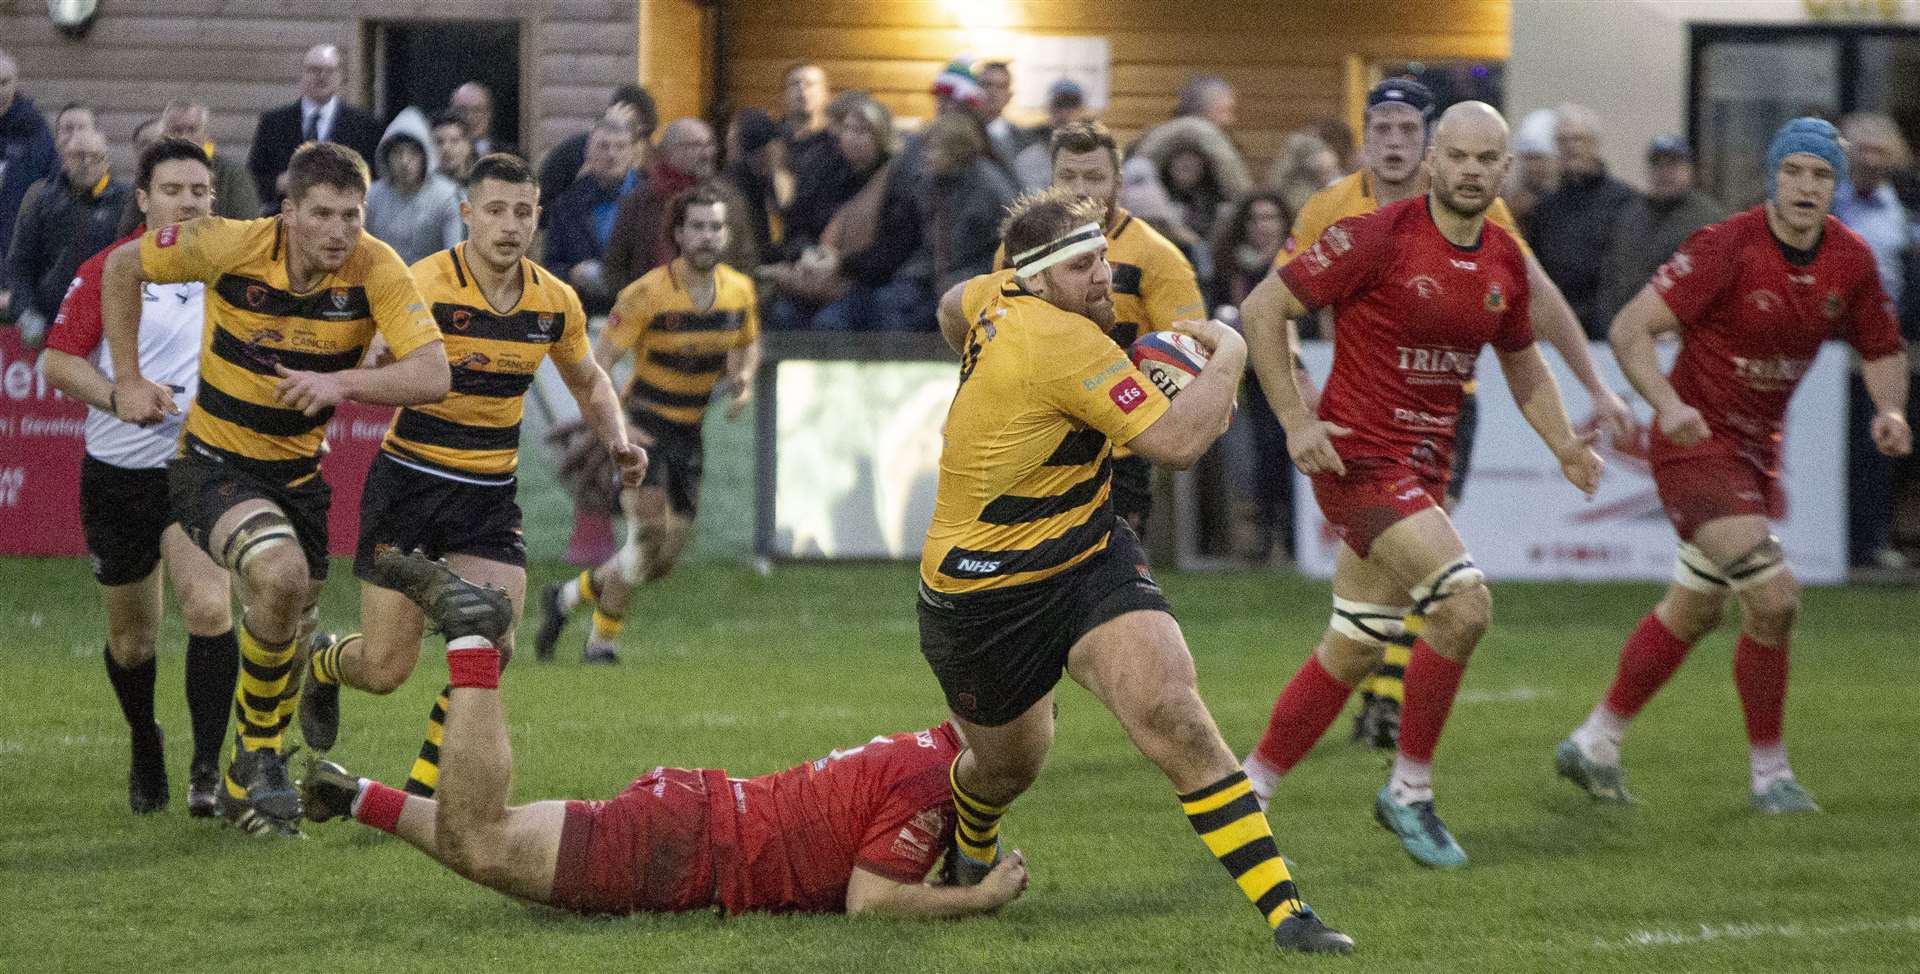 Alex Wake-Smith on a charge against Redruth Picture: Phillipa Hilton